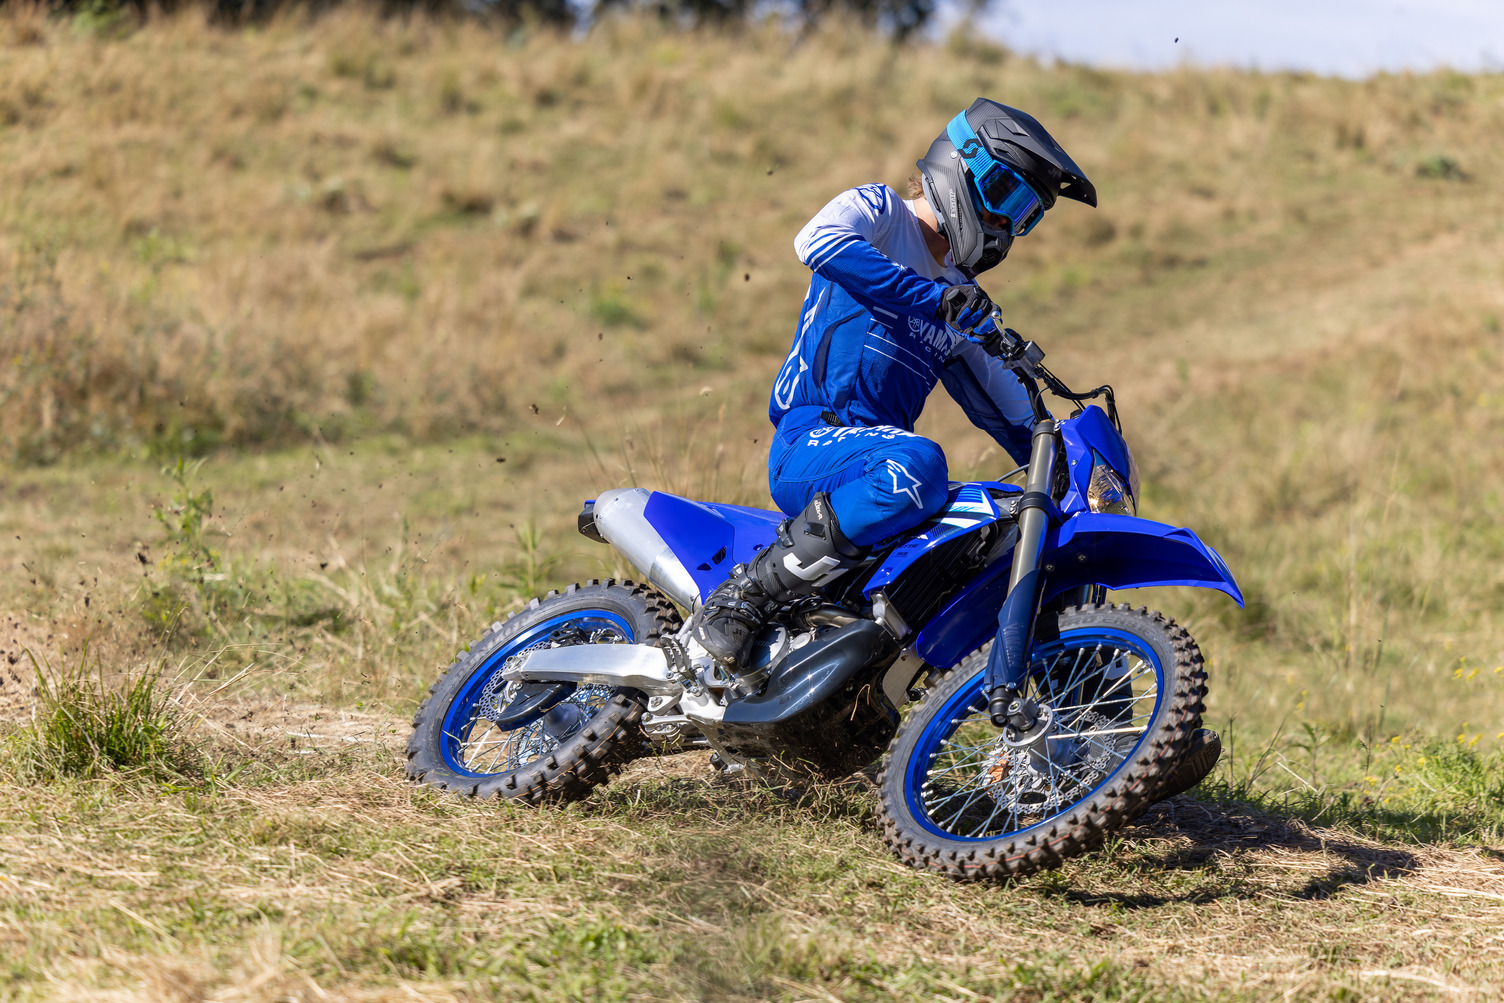 WR250F Action